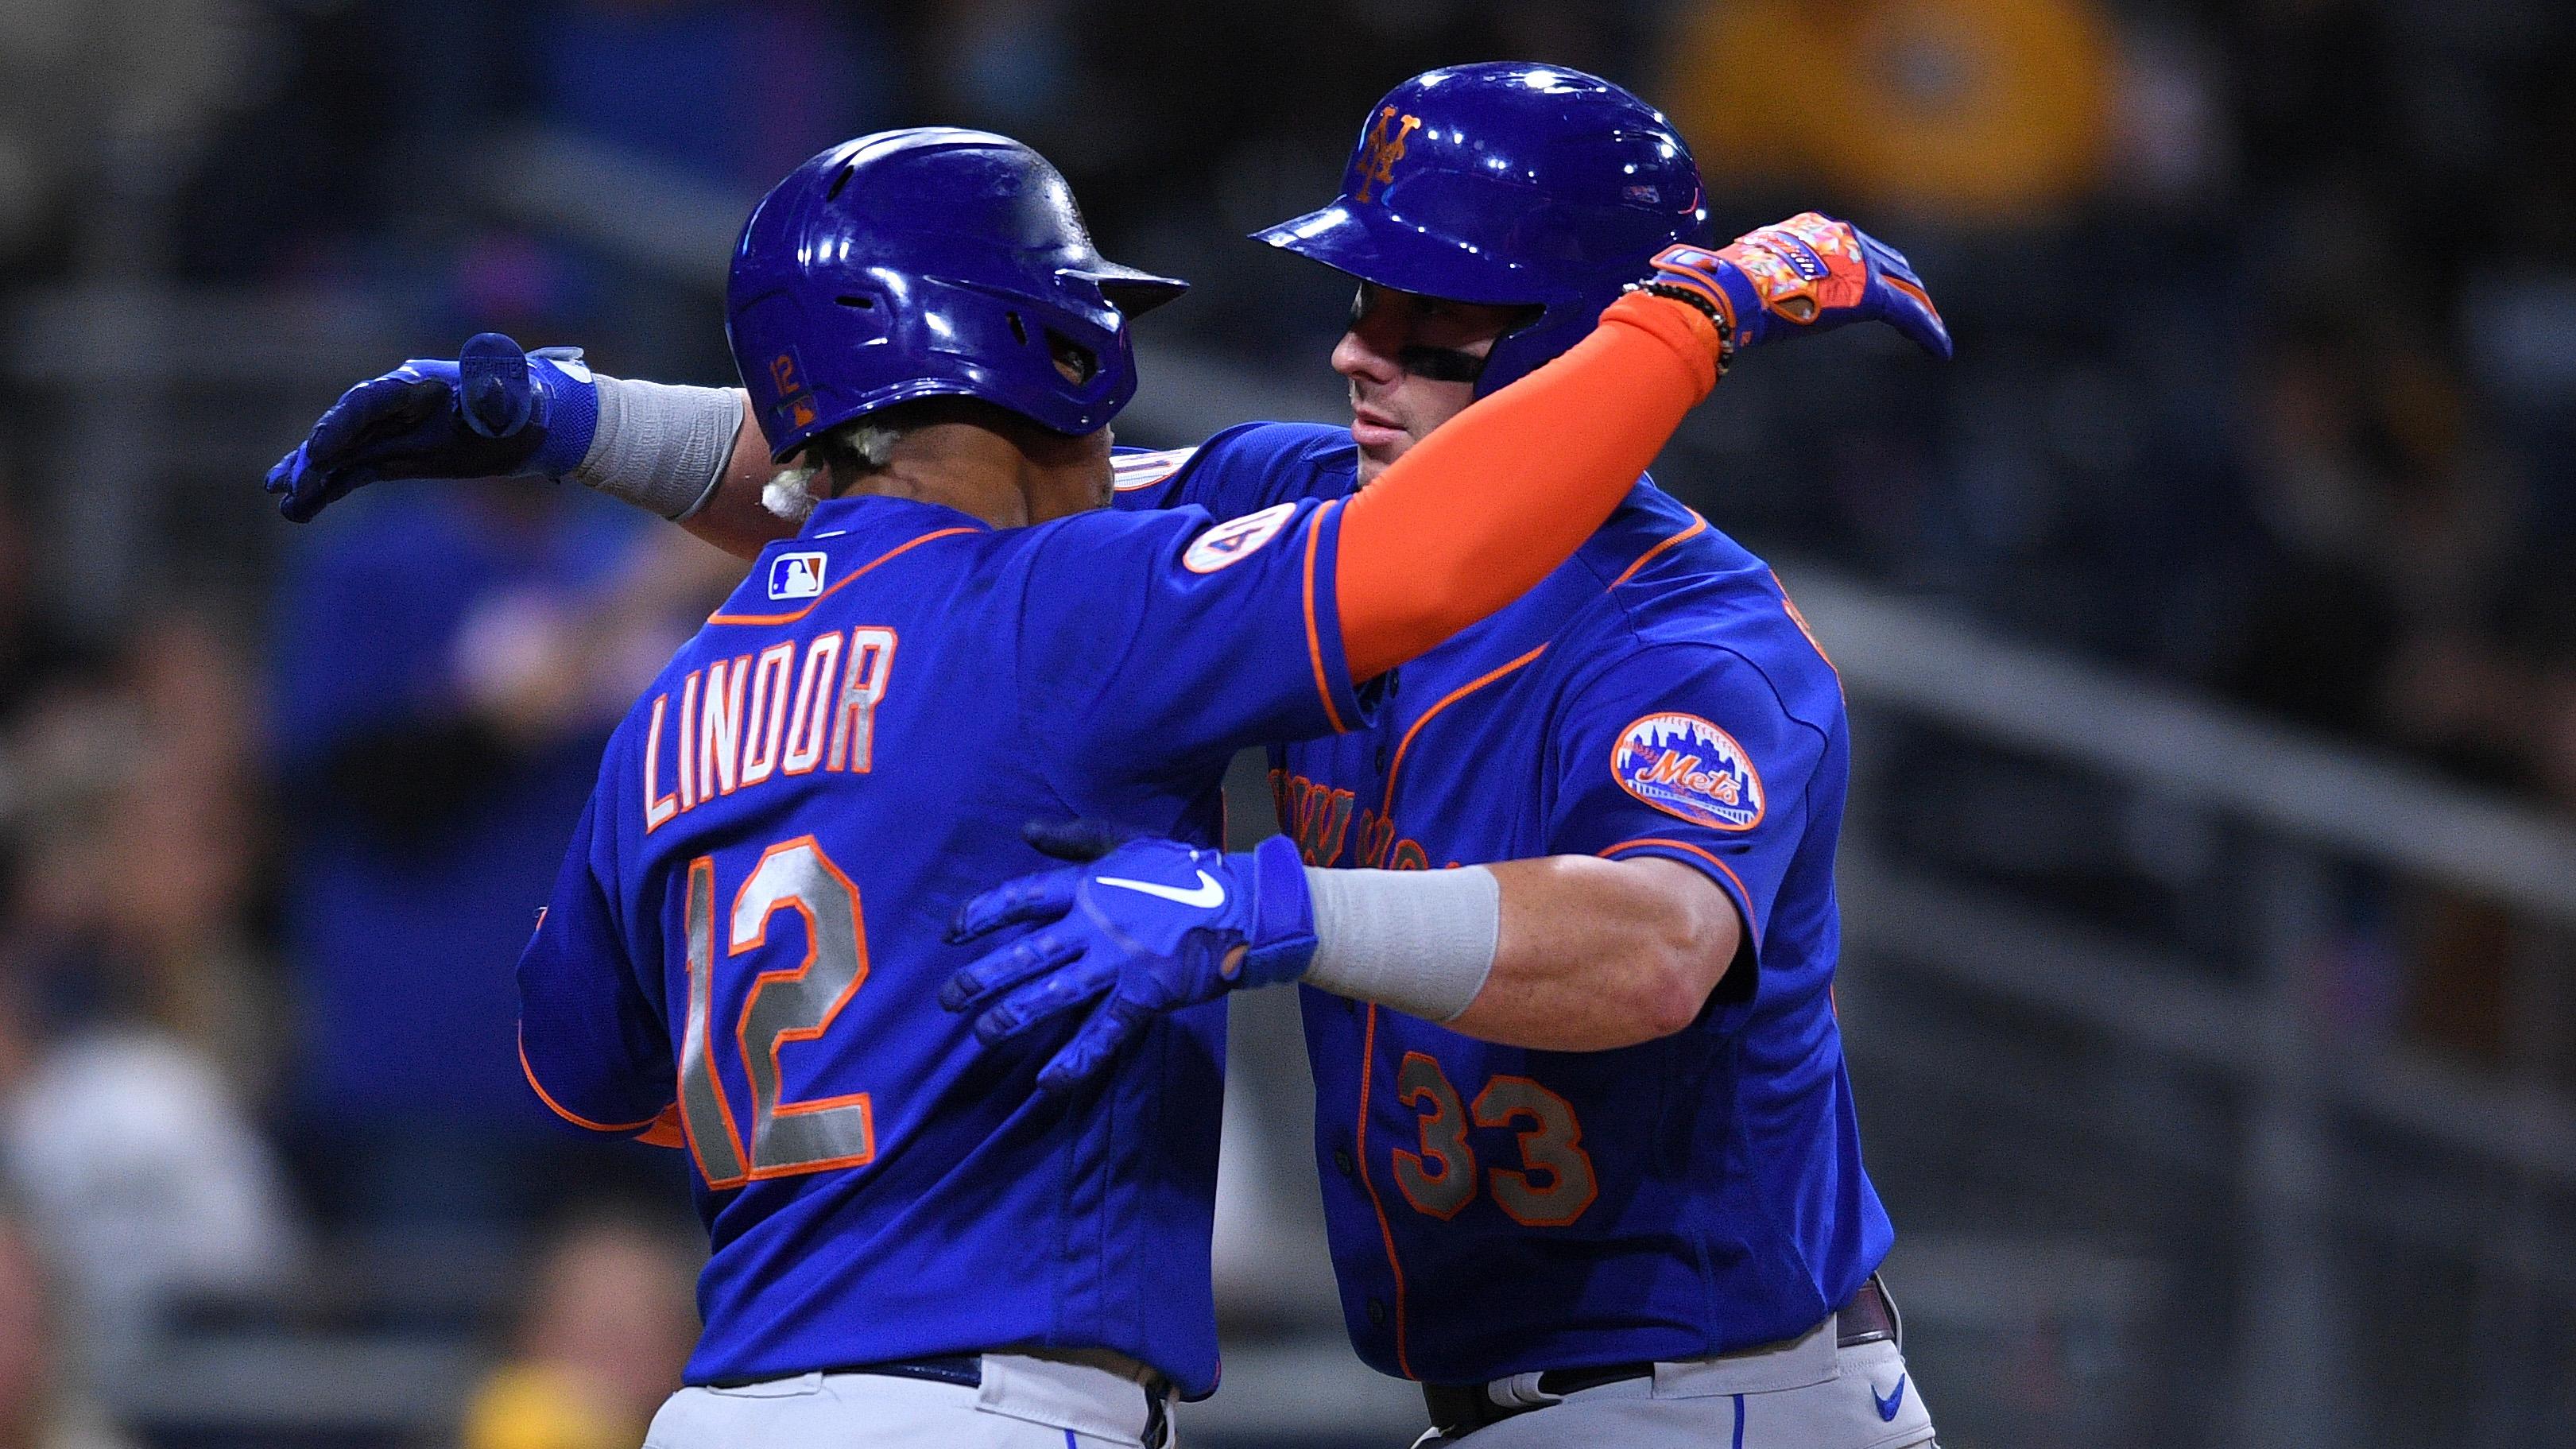 Jun 3, 2021; San Diego, California, USA; New York Mets catcher James McCann (33) celebrates with shortstop Francisco Lindor (12) after hitting a two-run home run against the San Diego Padres during the sixth inning at Petco Park. / Orlando Ramirez-USA TODAY Sports